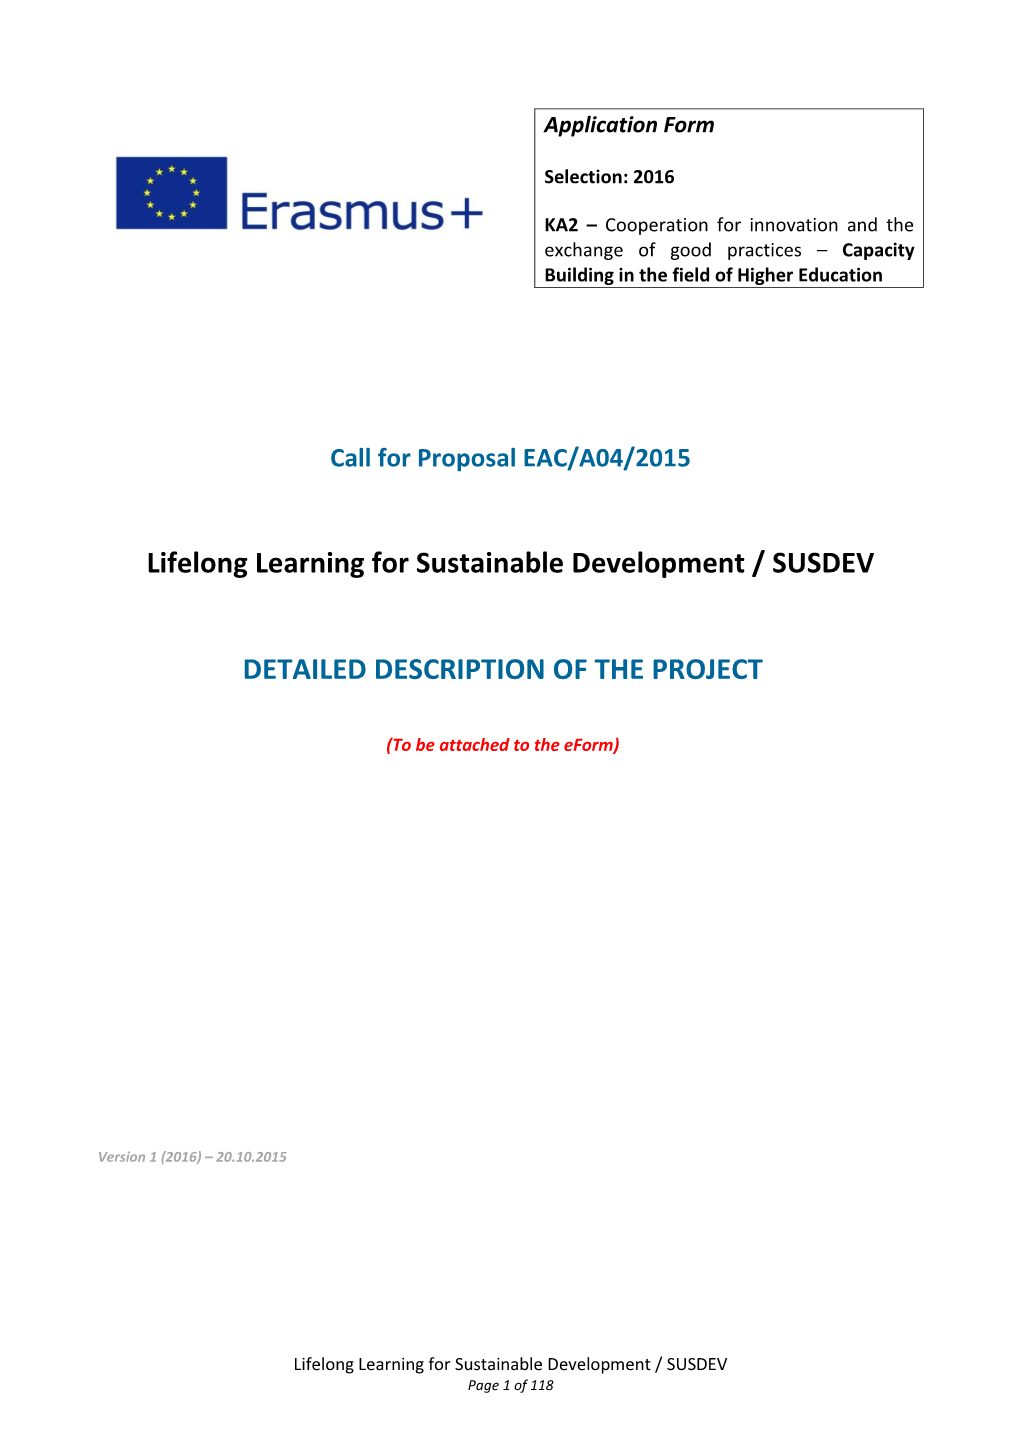 Lifelong Learning for Sustainable Development / SUSDEV DETAILED DESCRIPTION of the PROJECT